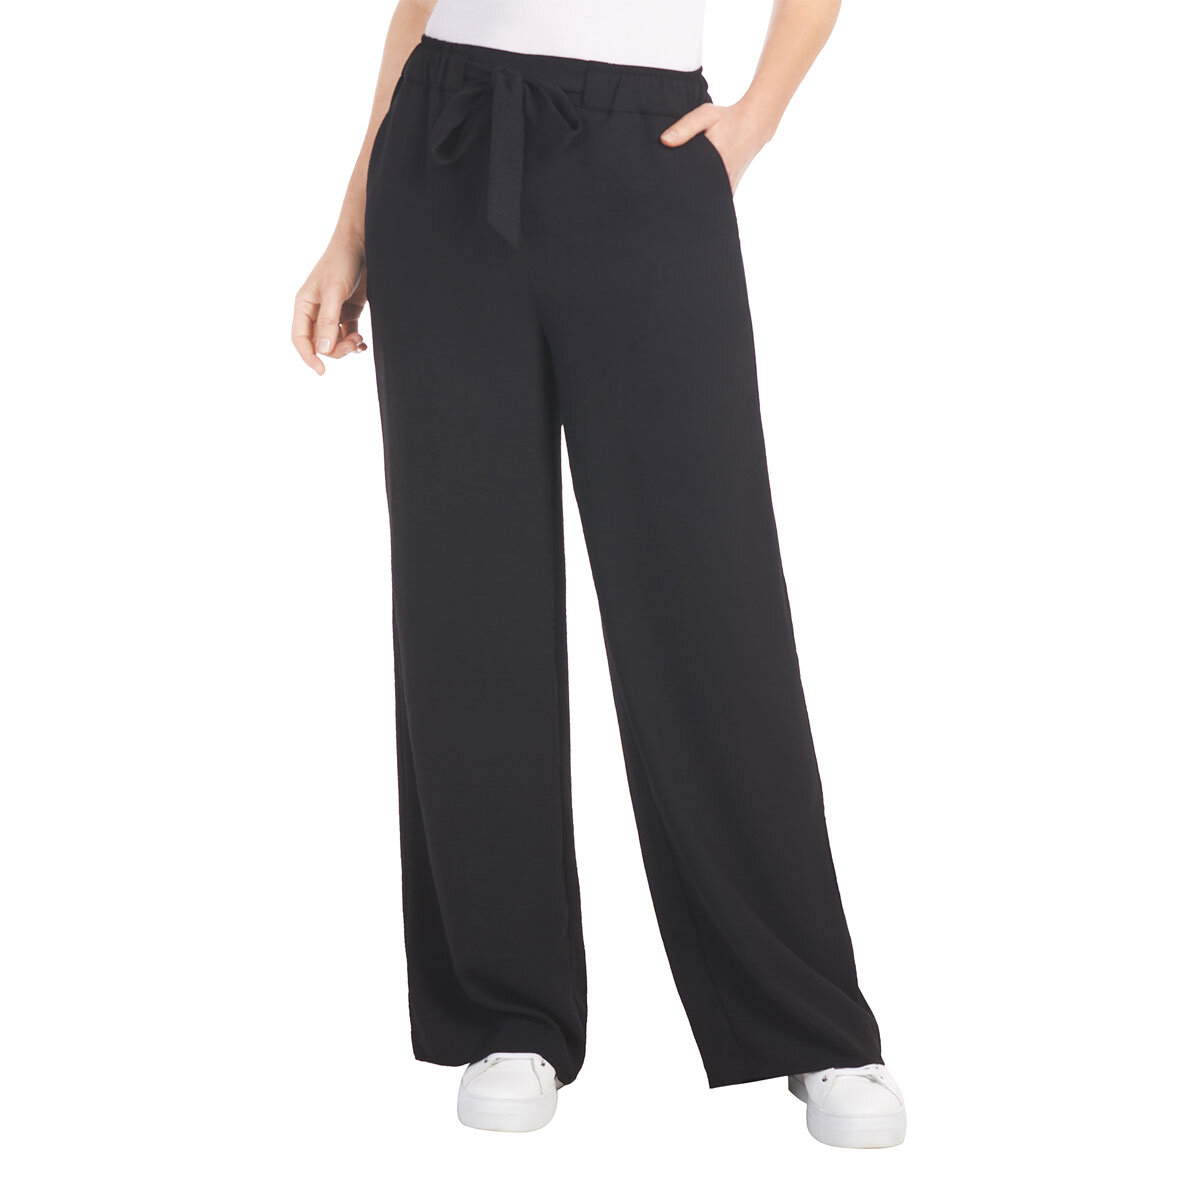 Hilary Radley Ladies Wide Leg Trousers in 4 Colours & 4 Sizes